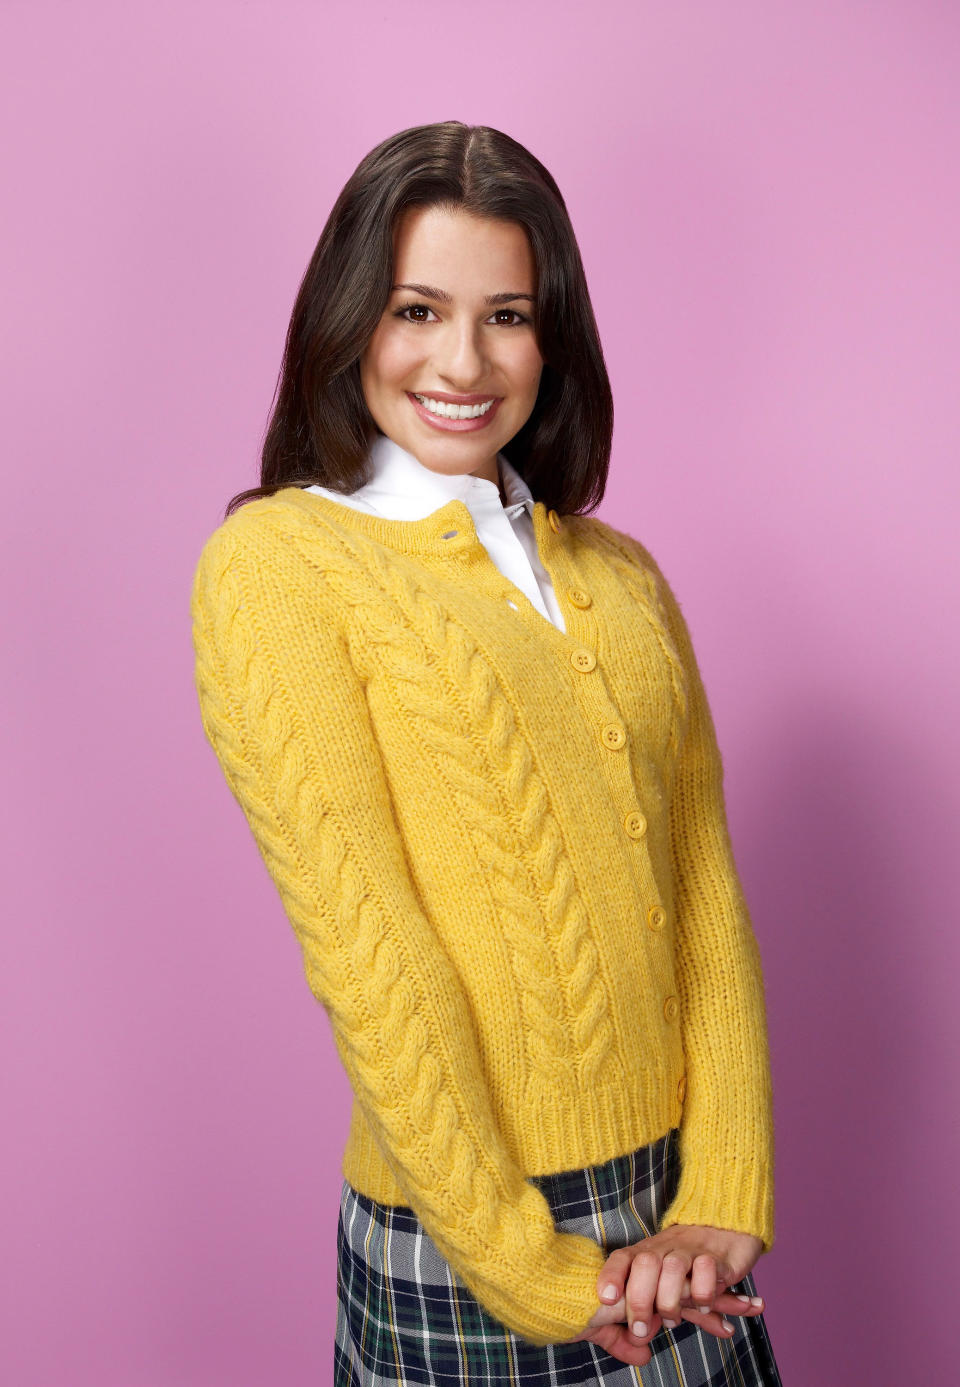 GLEE: Lea Michele as Rachel on GLEE, the new one-hour comedy musical series premieres Wednesday, Sept. 9 (9:00-10:00 PM ET/PT) on FOX. (Photo by FOX Image Collection via Getty Images)